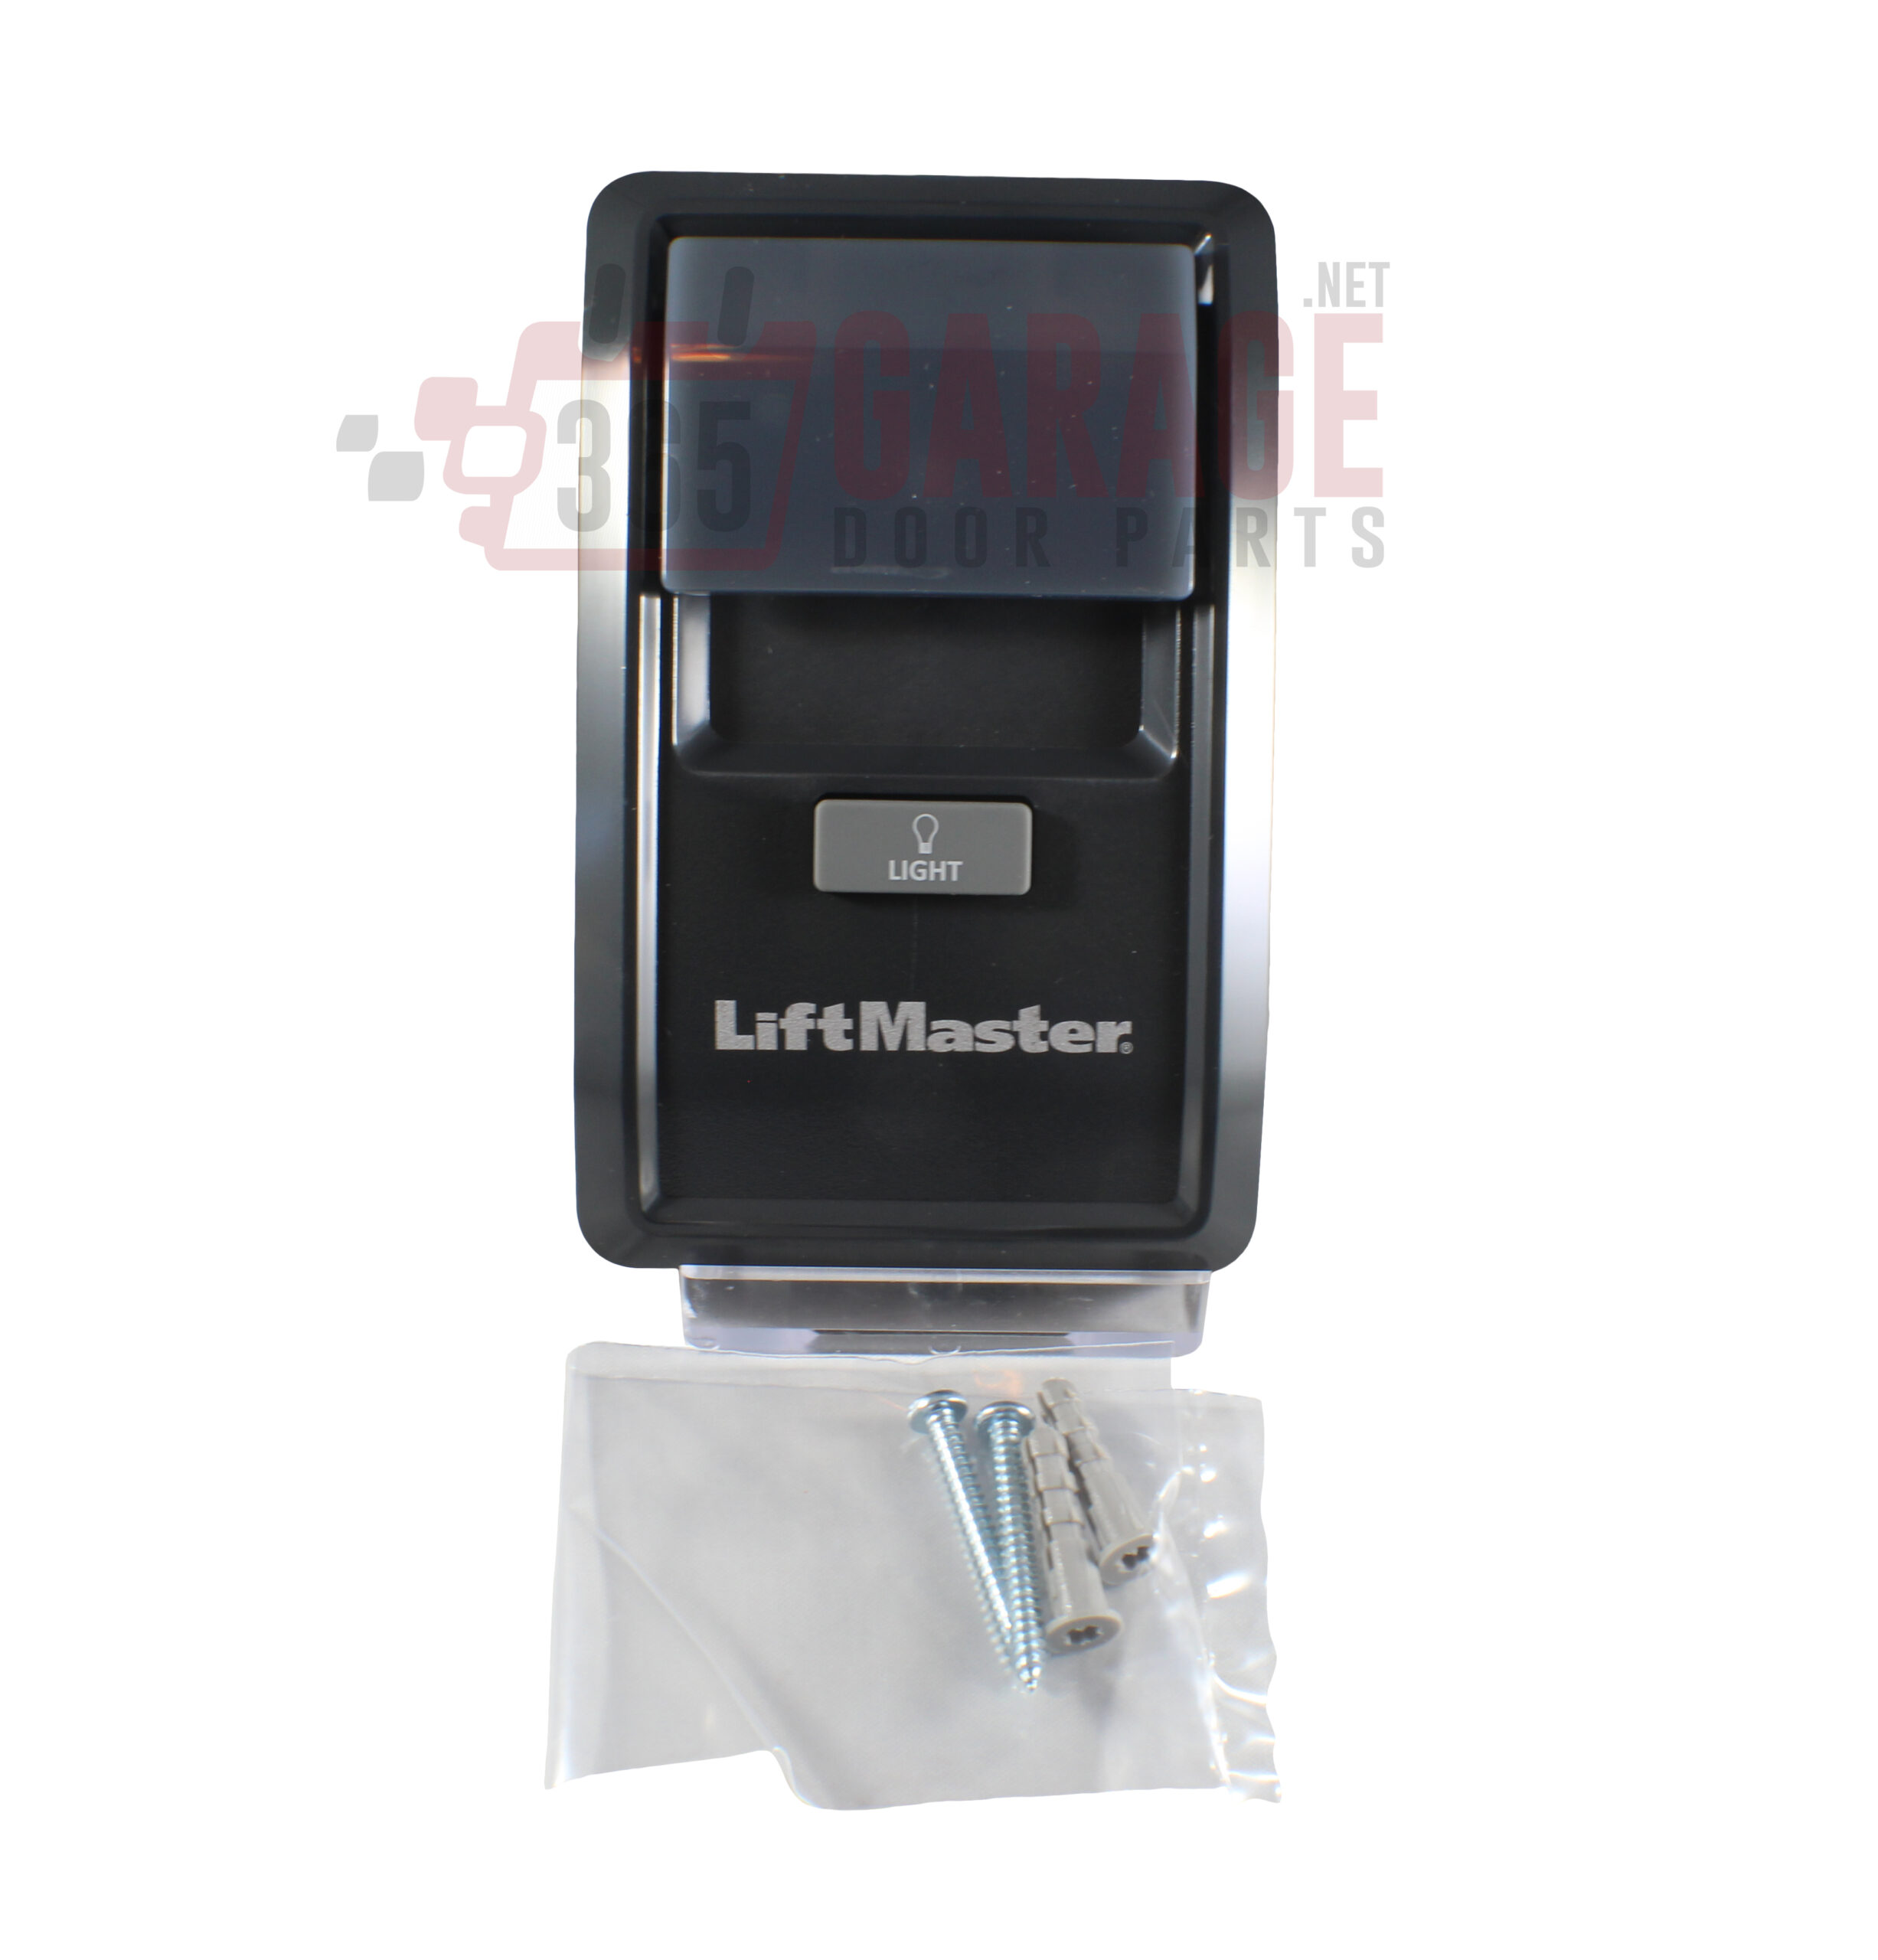 LiftMaster 885LM Smart Multi-function Wireless Wall Control Garage Security+ 2.0 - 885lm ScaleD